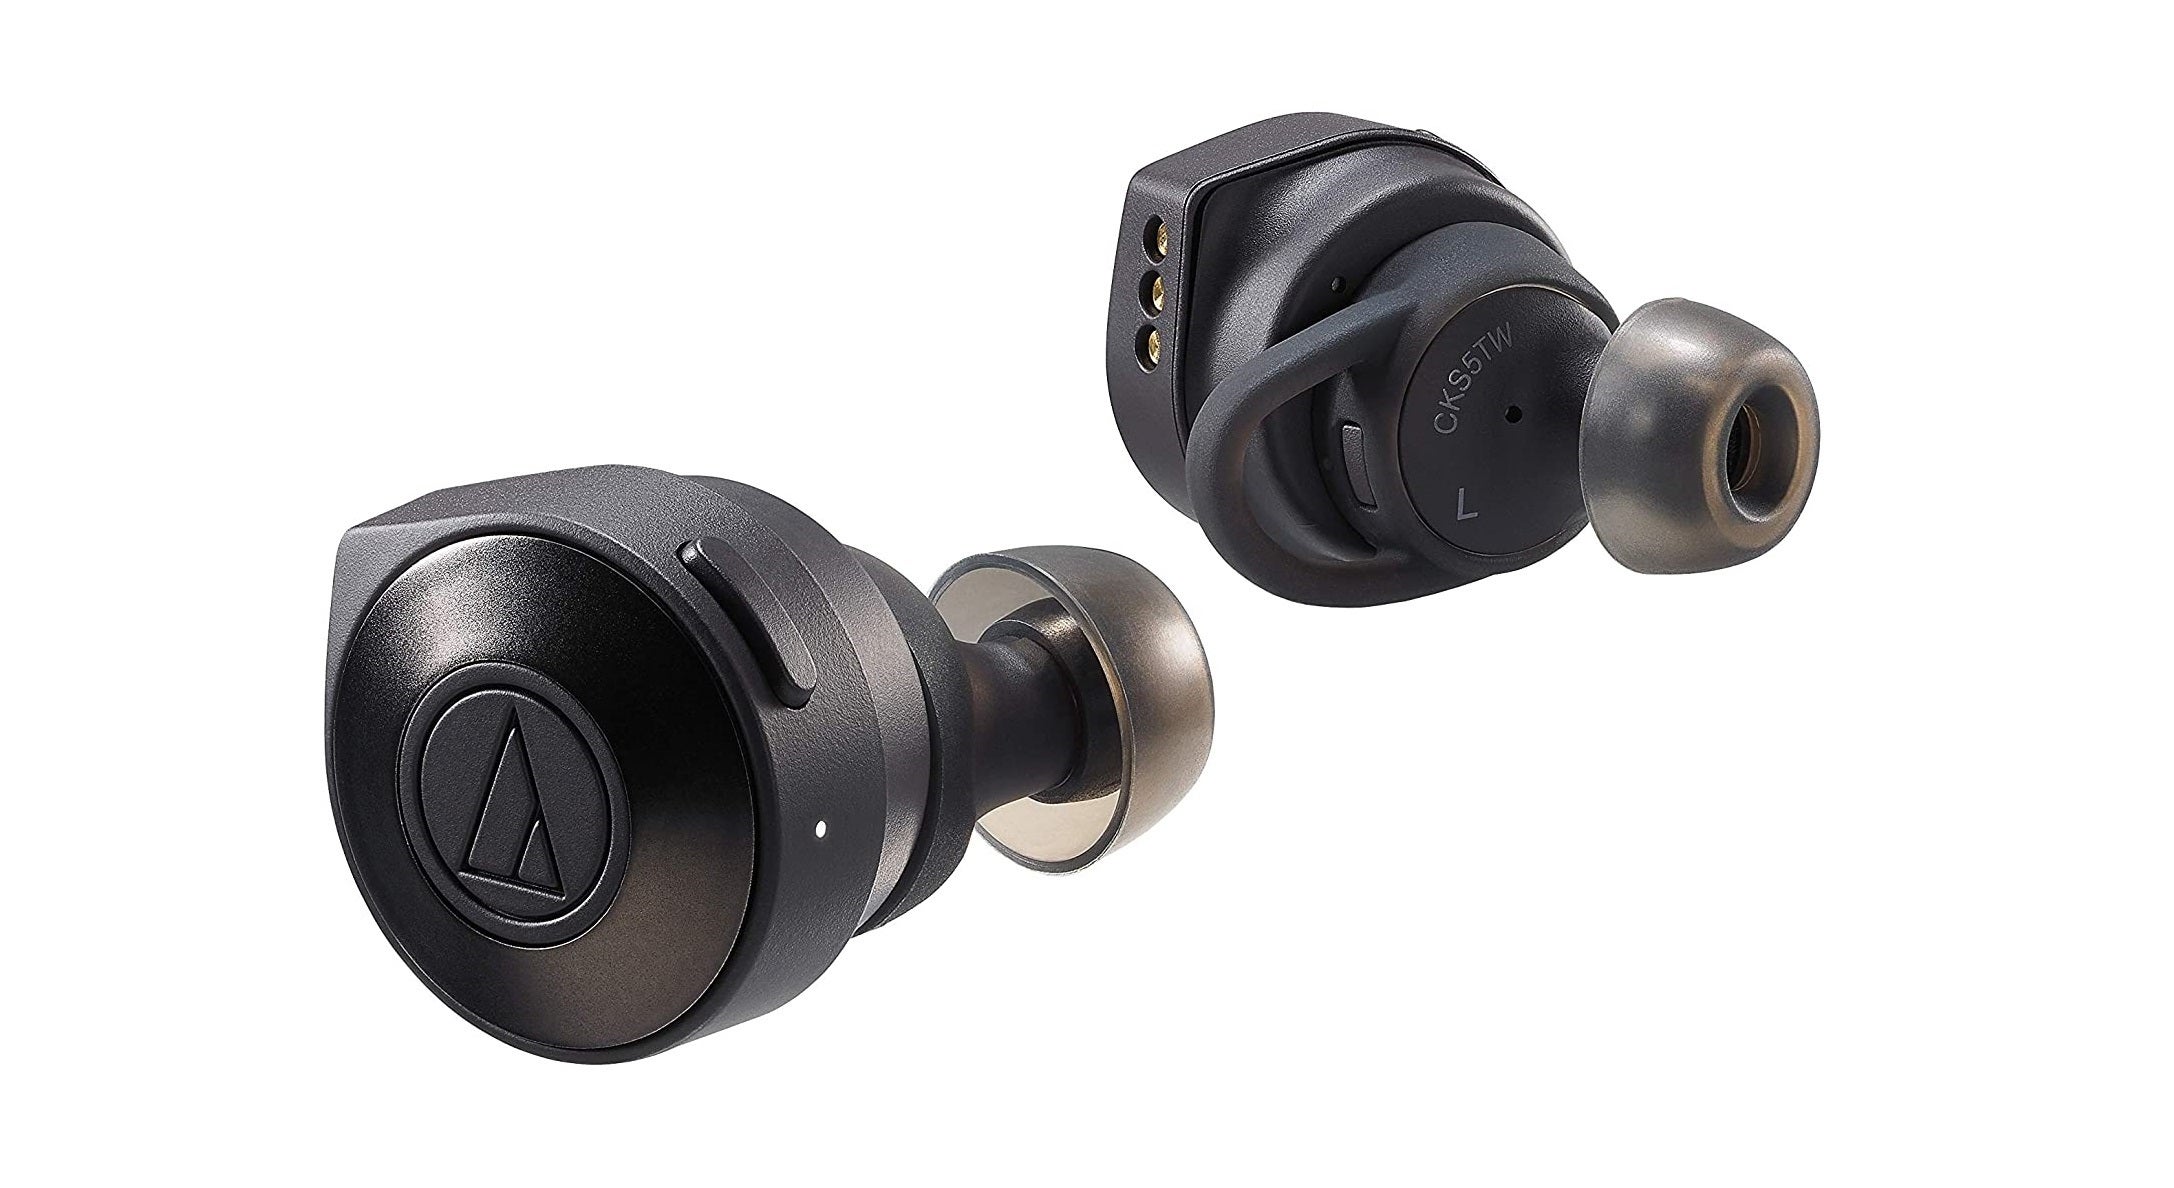 Best wireless earbuds to buy right now (Updated April 2022)